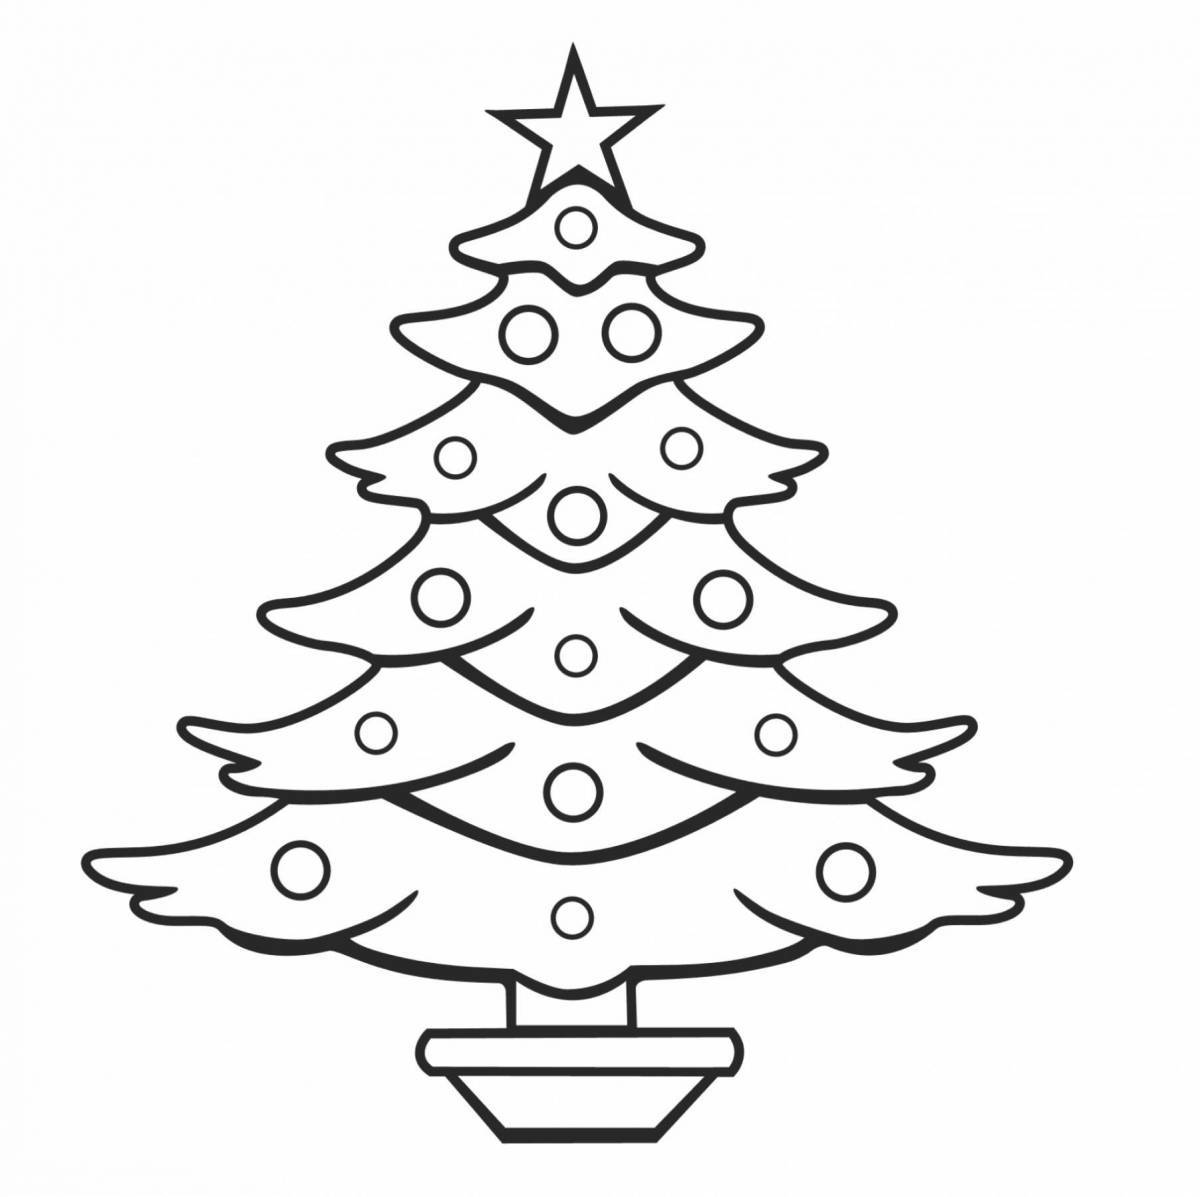 Adorable Christmas tree coloring book for 3-4 year olds